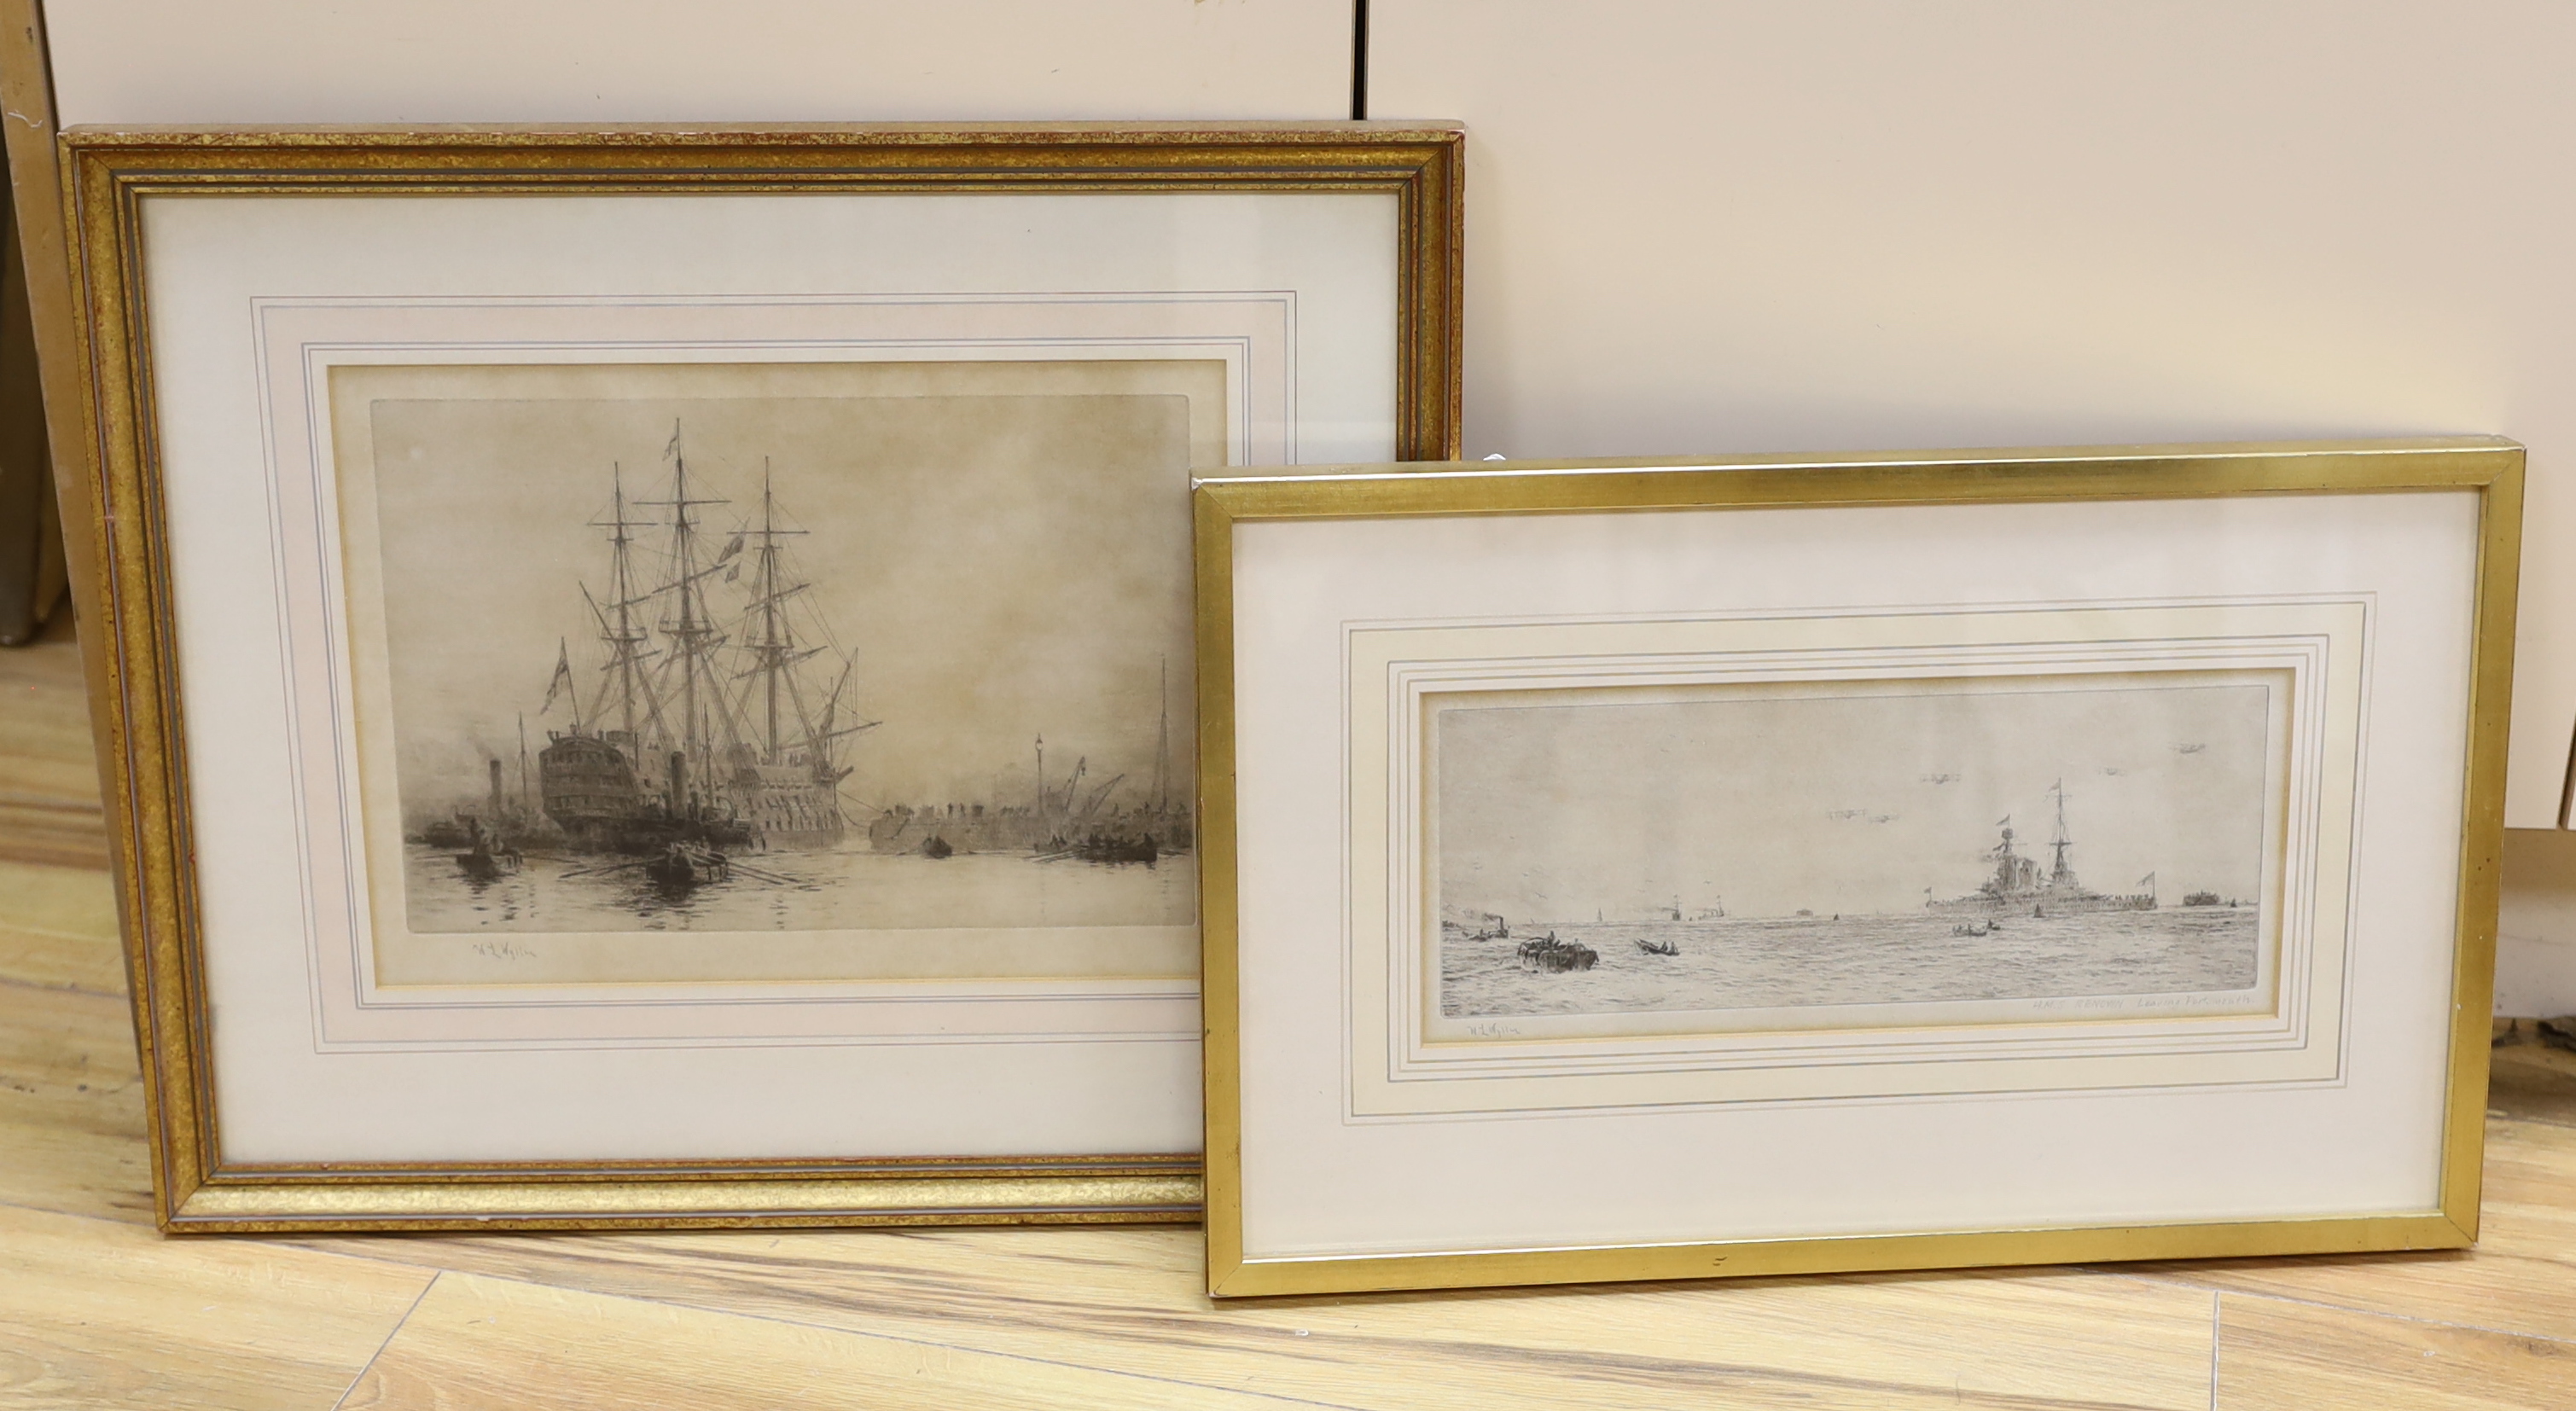 William Lionel Wyllie (1851-1931), two etchings, ‘HMS Renown leaving Portsmouth’ and one other, each signed in pencil, largest 25 x 34cm